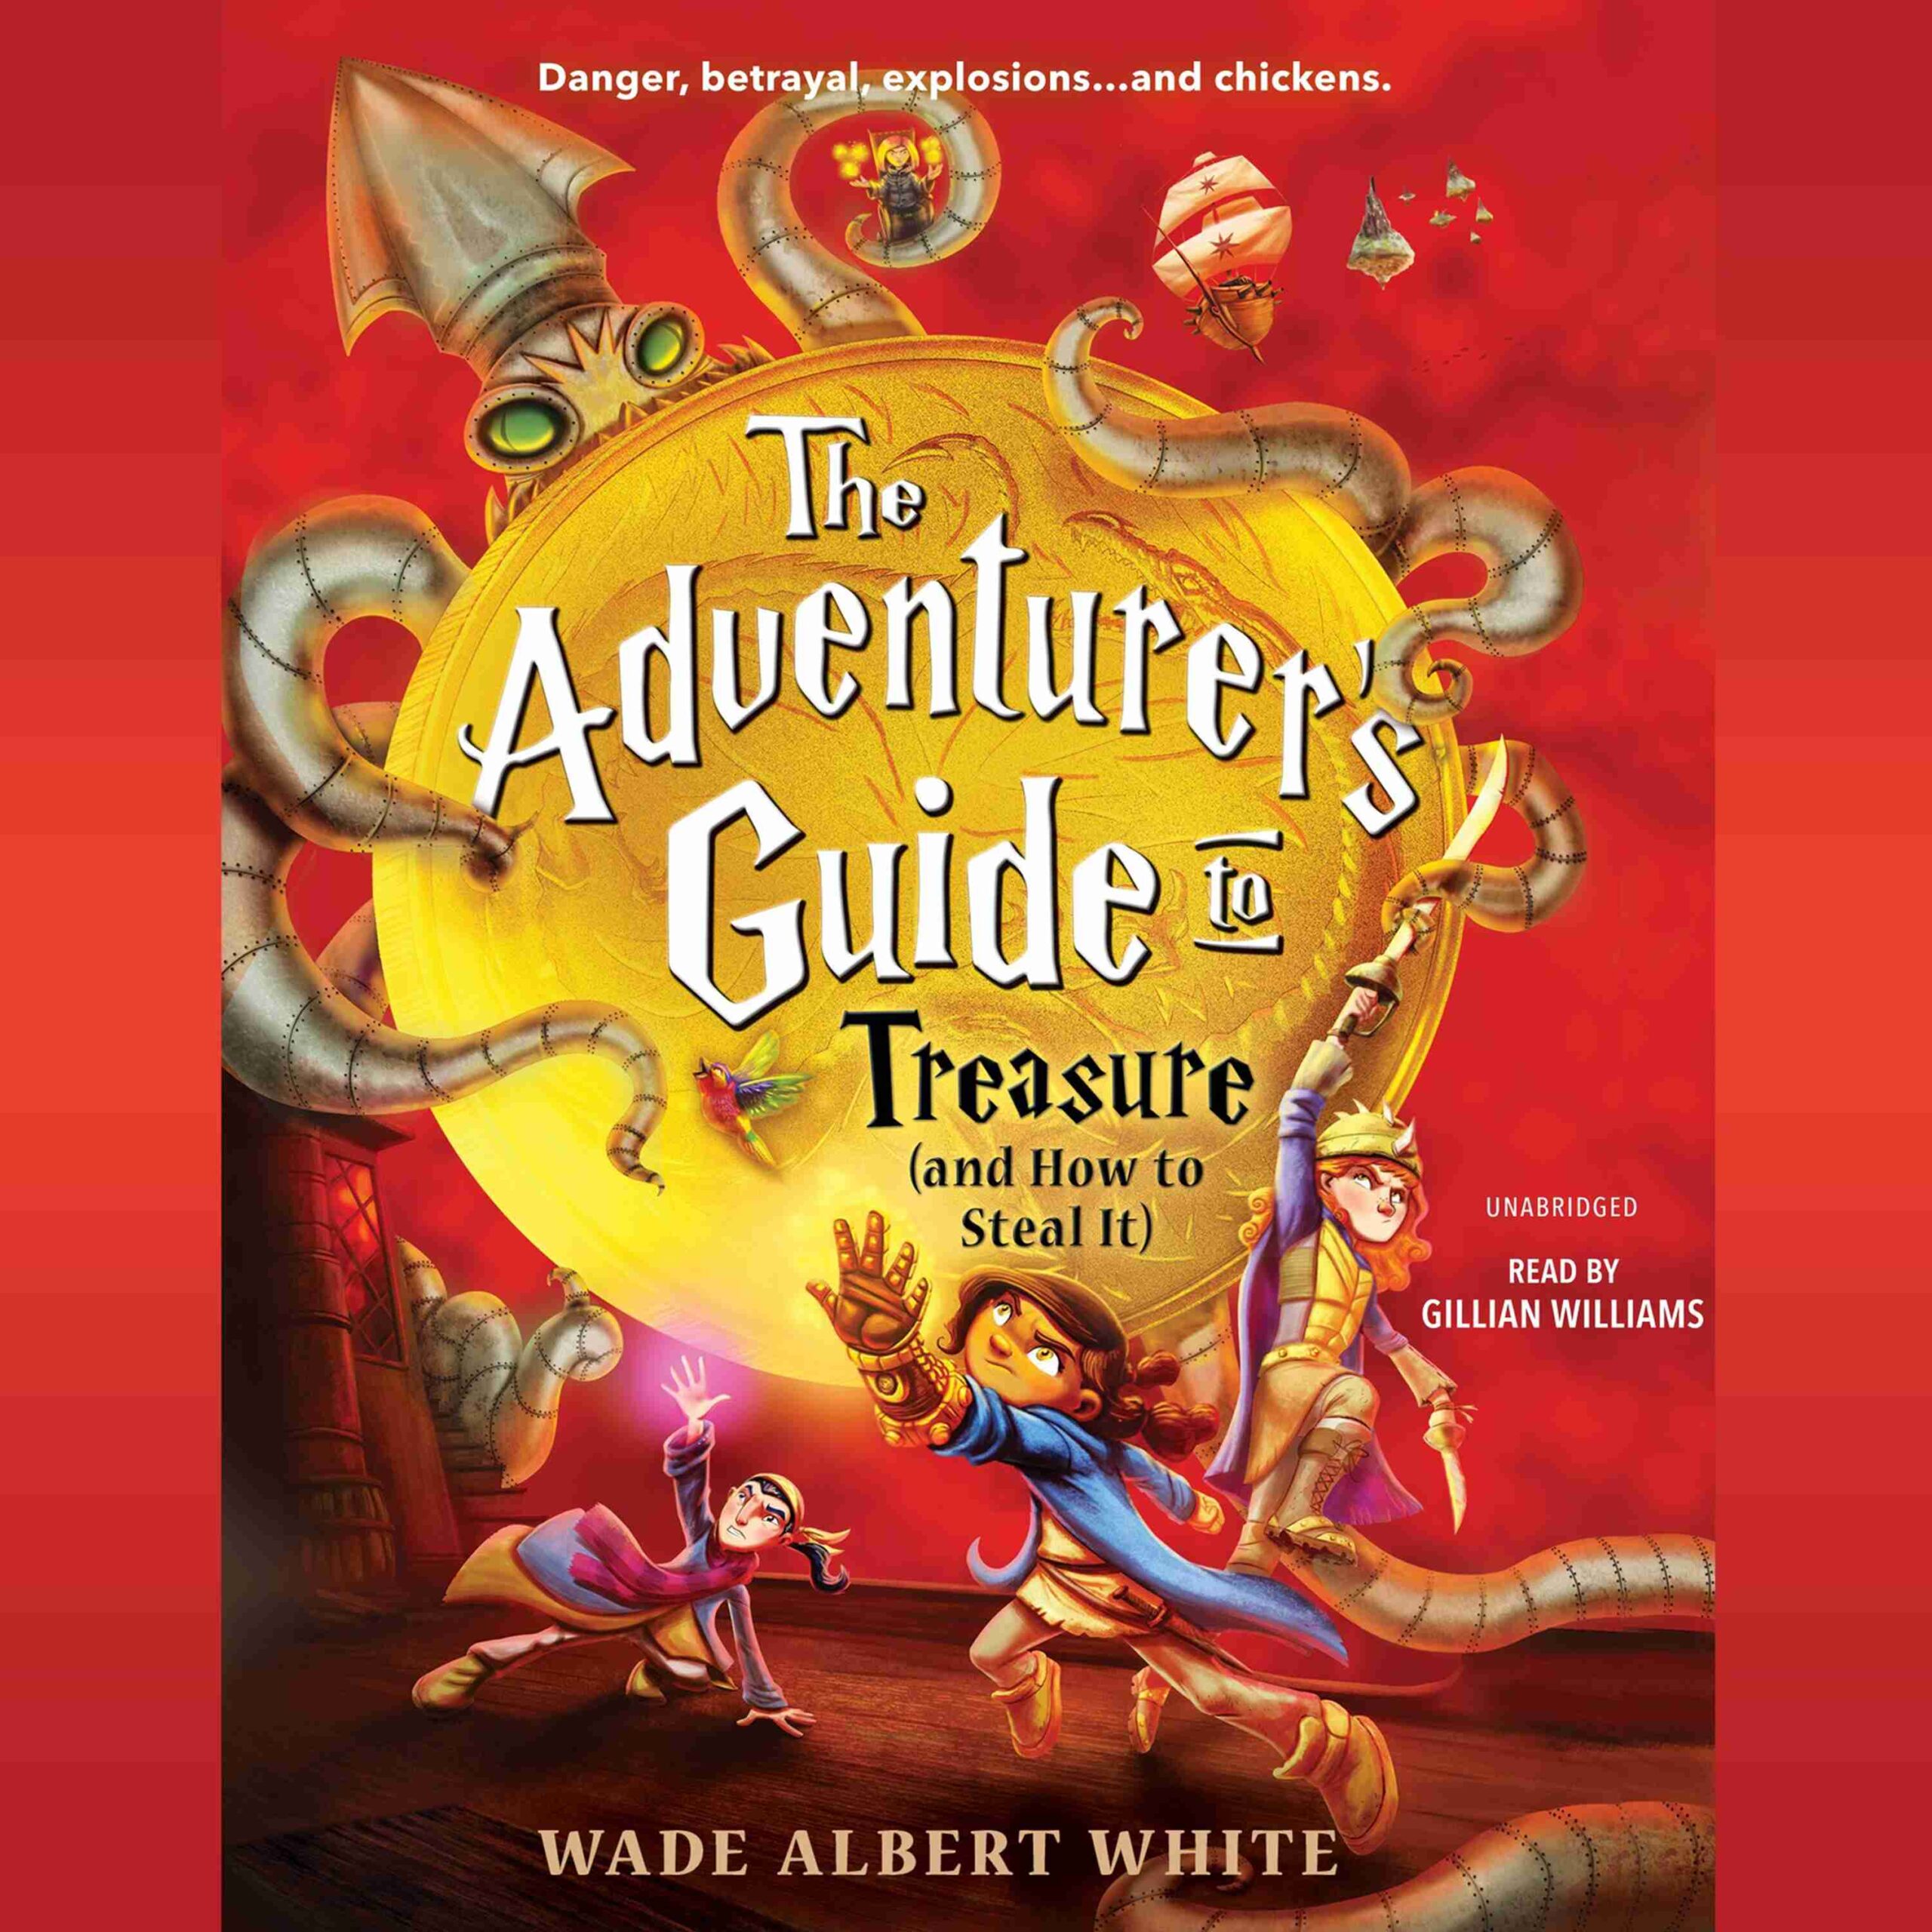 The Adventurer’s Guide to Treasure (and How to Steal It) byWade Albert White Audiobook. 22.95 USD